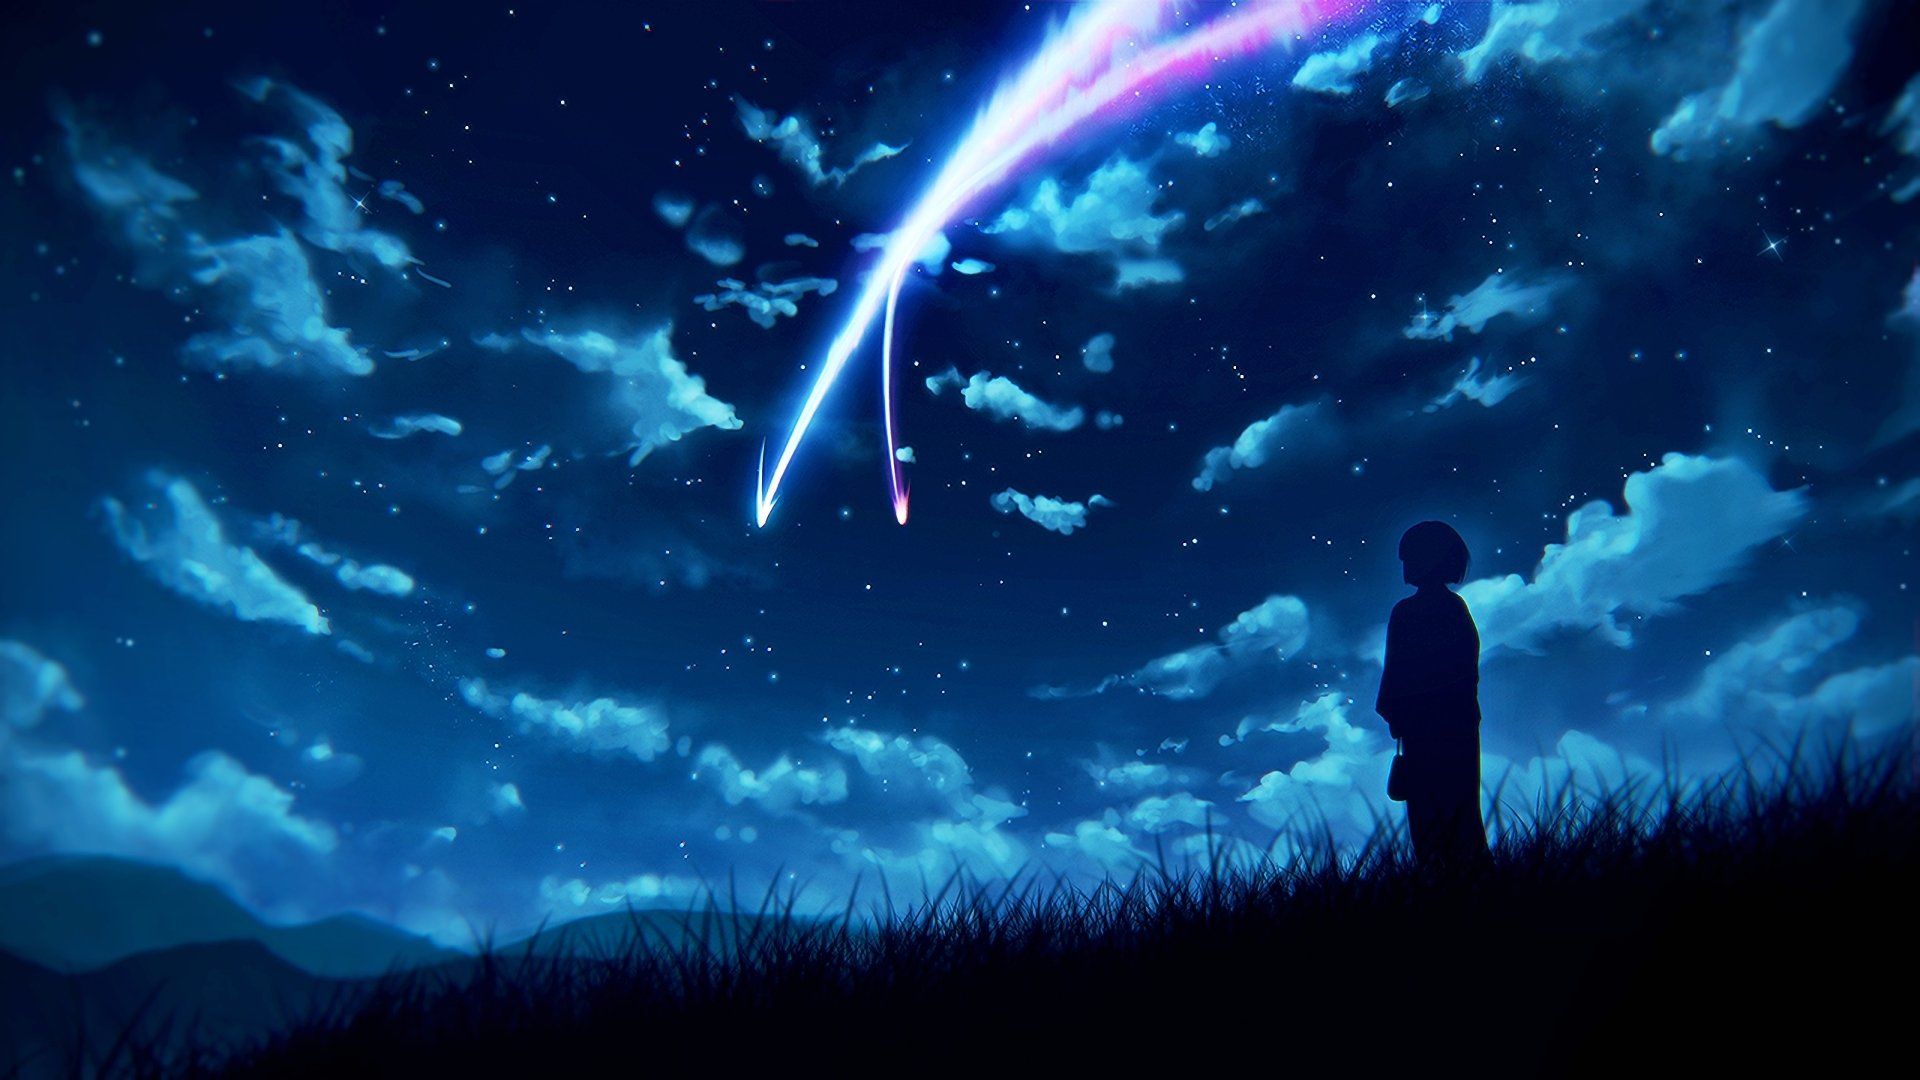 1920×1080 comet sky wallpaper from the movie “Your Name”